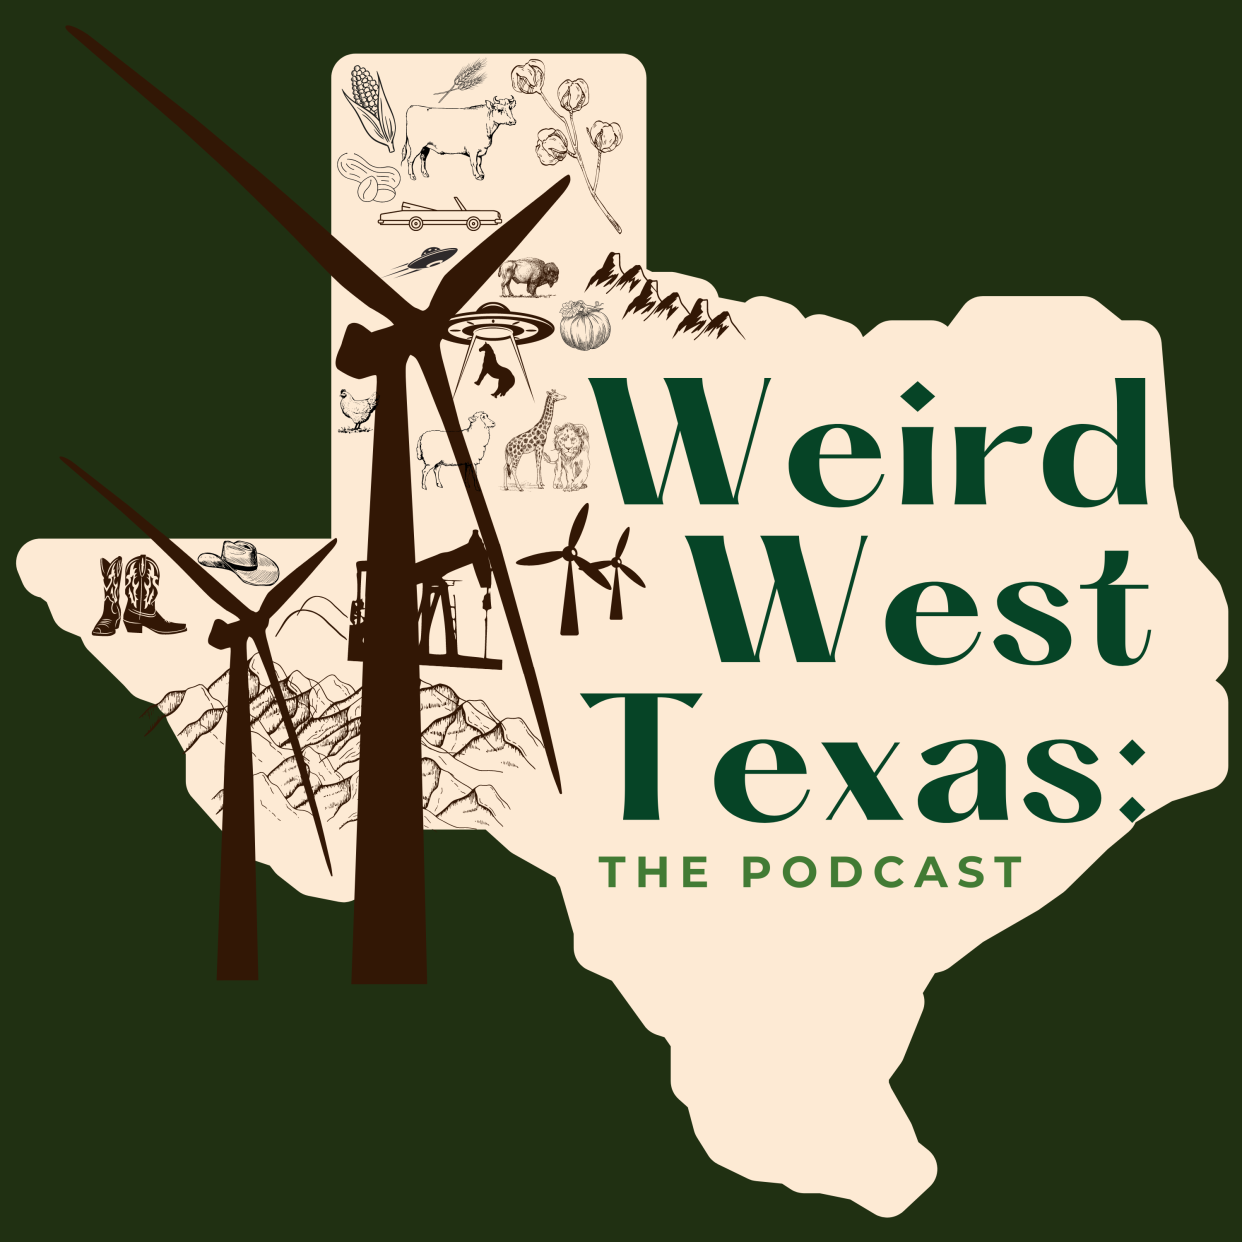 Weird West Texas: The Podcast explores some of the most odd, eccentric and, sometimes, just plain weird things in our region.